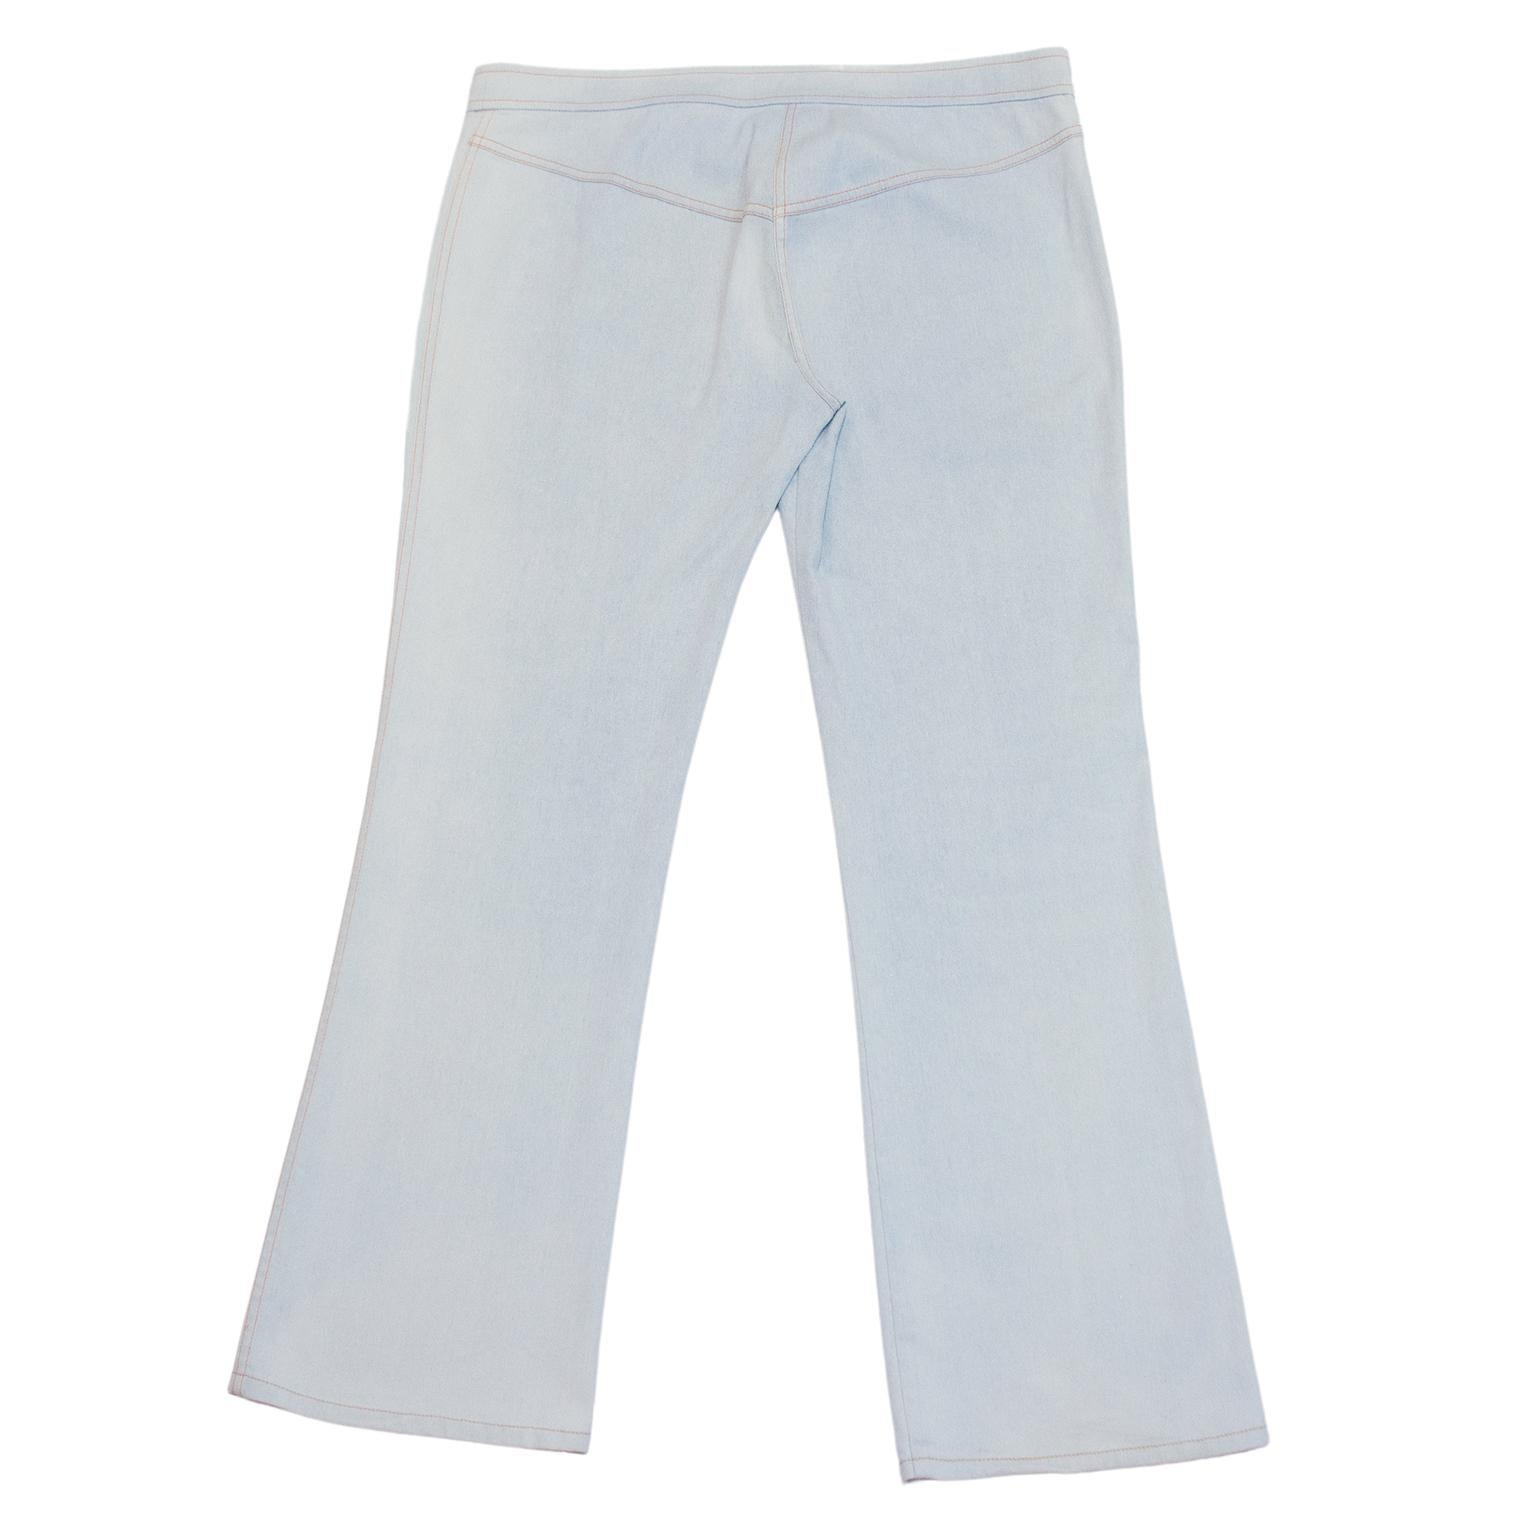 Christian Dior jeans designed by John Galliano in the early 2000's. Light blue wash with metallic silver throughout and contrasting orange top stitching. Faux button fly - zipper behind buttons. Low-is rise and boot cut. Rounded patch pockets at